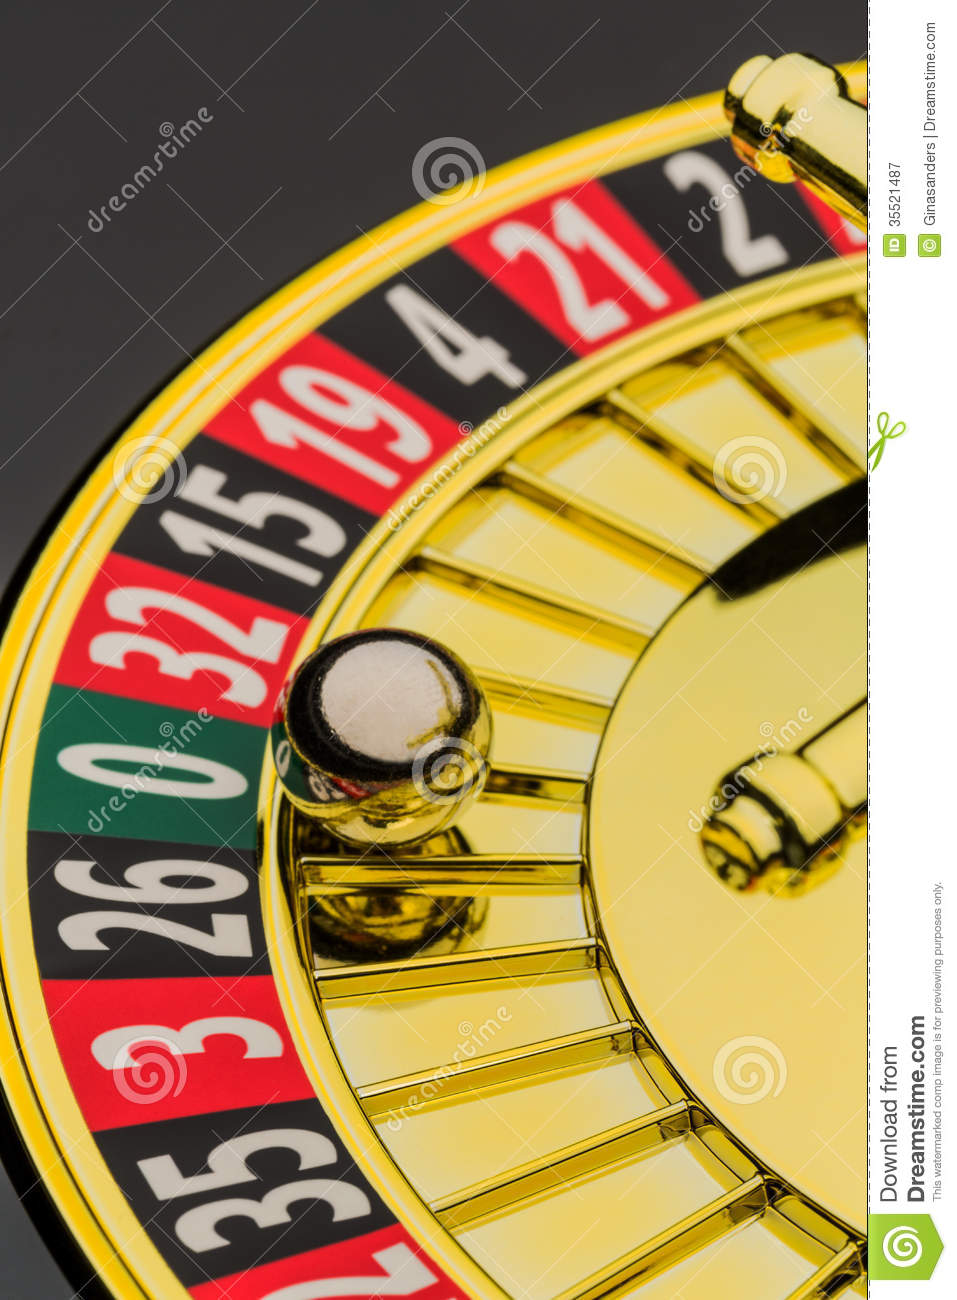 Roulette Gambling In The Casino Royalty Free Stock Photography   Image